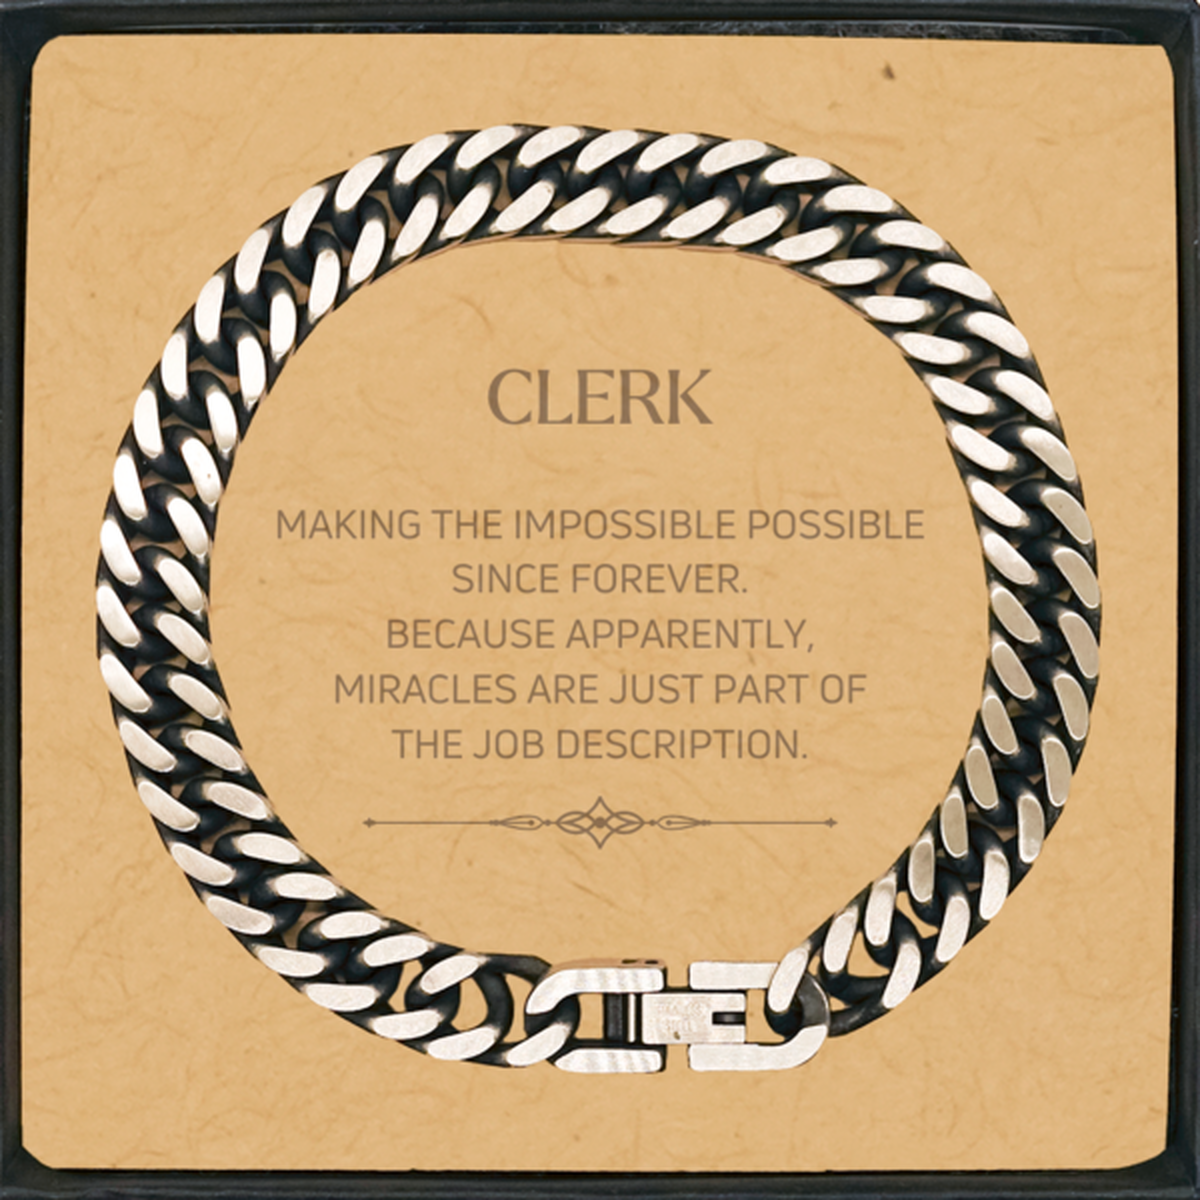 Funny Clerk Gifts, Miracles are just part of the job description, Inspirational Birthday Cuban Link Chain Bracelet For Clerk, Men, Women, Coworkers, Friends, Boss